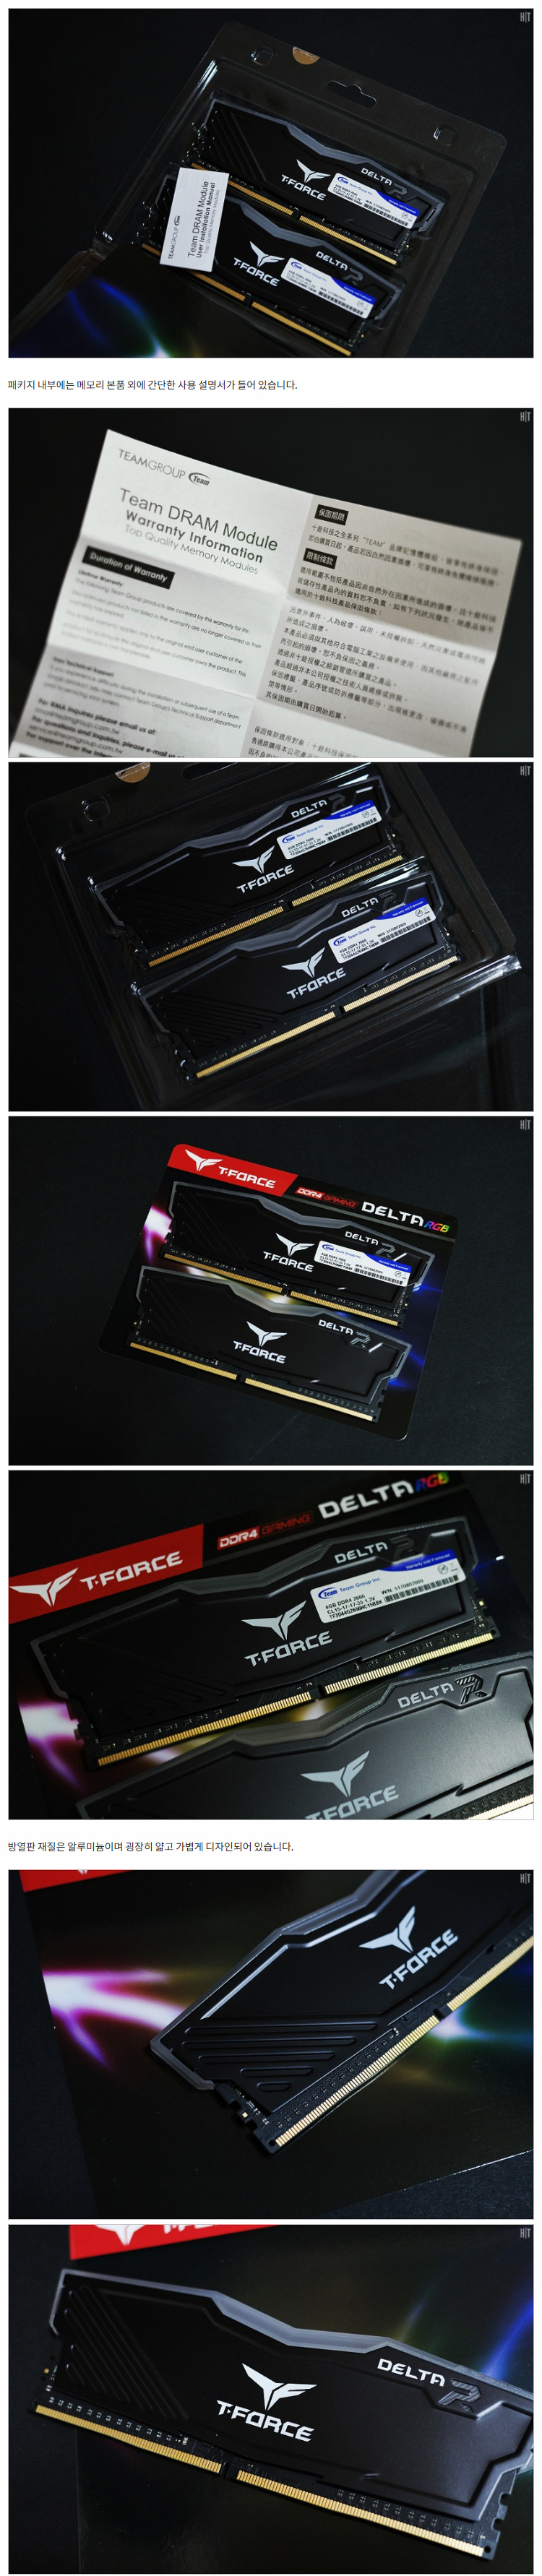 TeamGroup T-Force Delta RGB DDR4 - 3.jpg